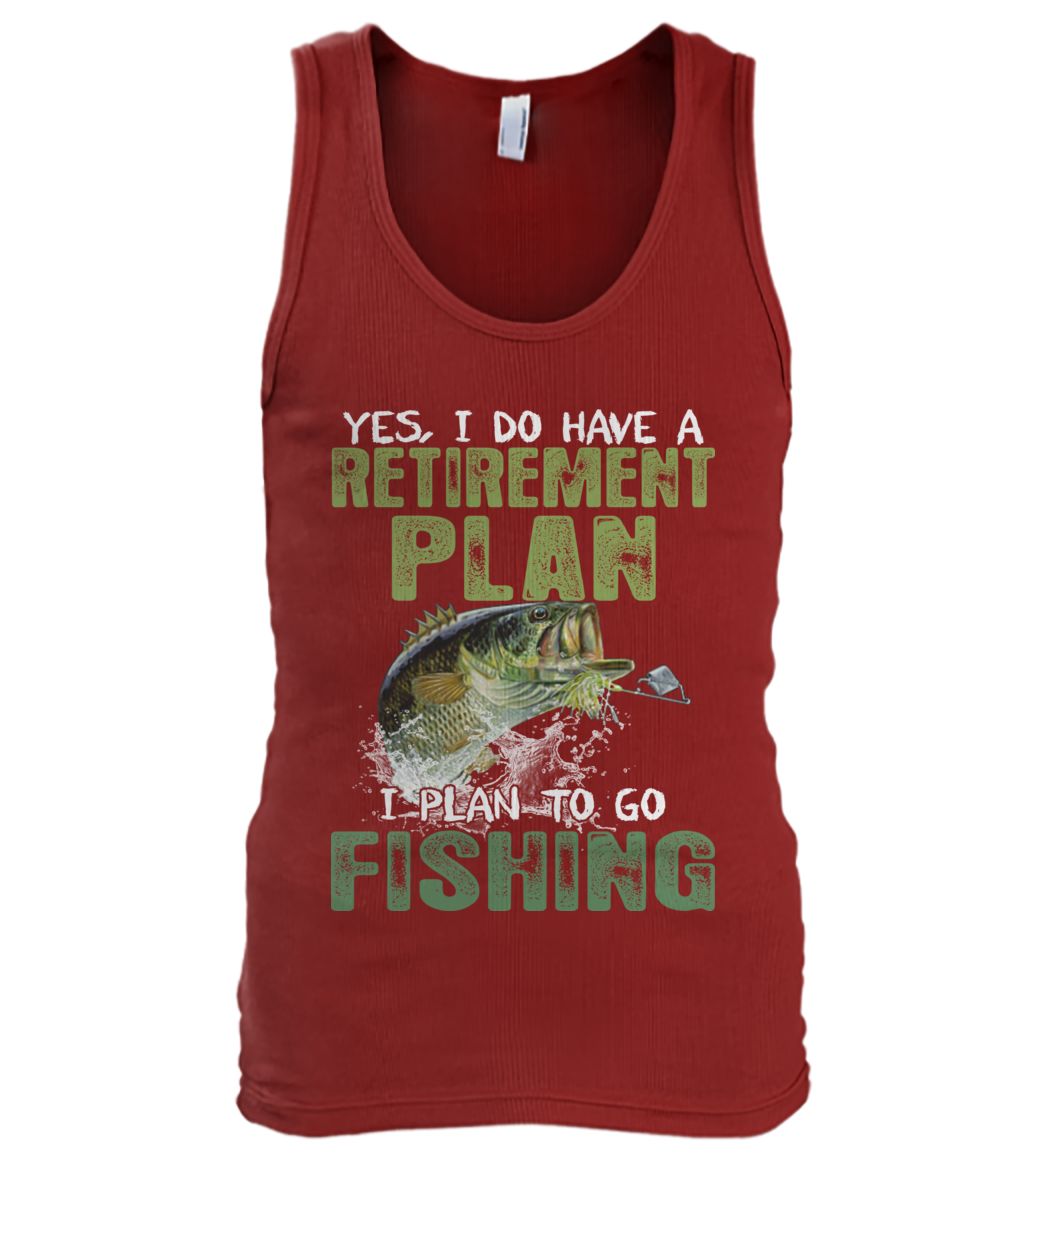 Yes I do have a retirement plan I plan to go fishing men's tank top